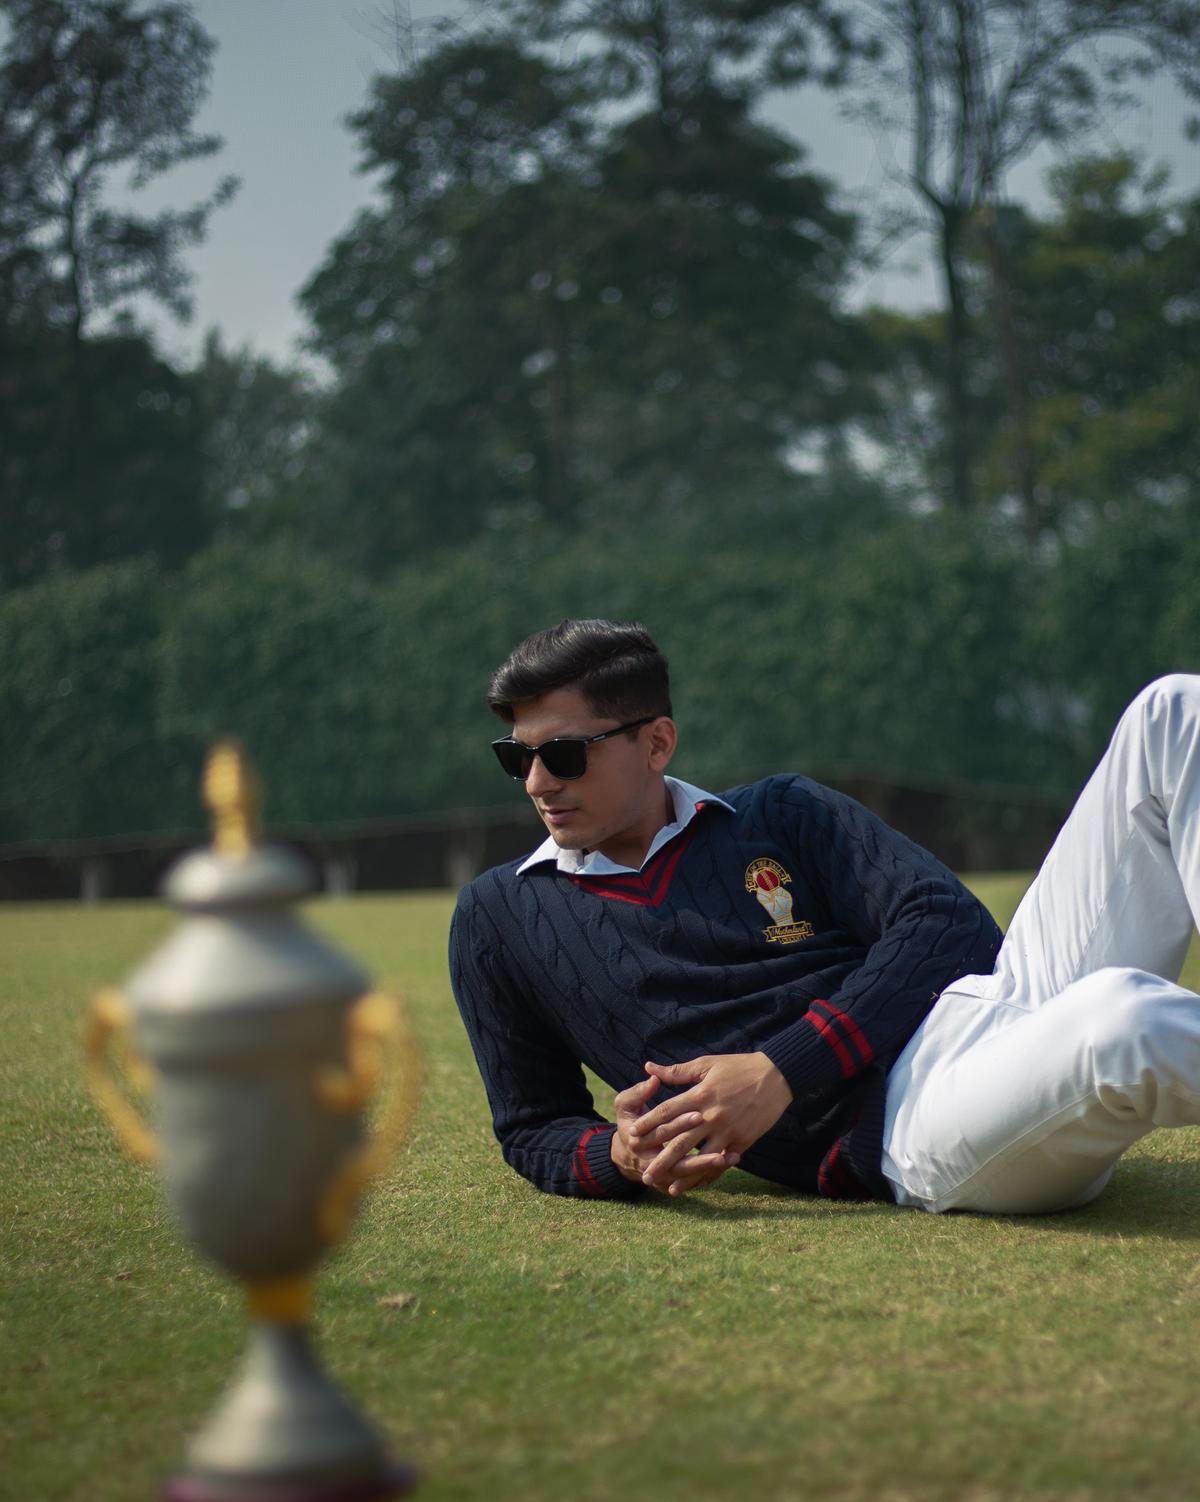 The collection pays a tribute to the meritocratic spirit of cricket